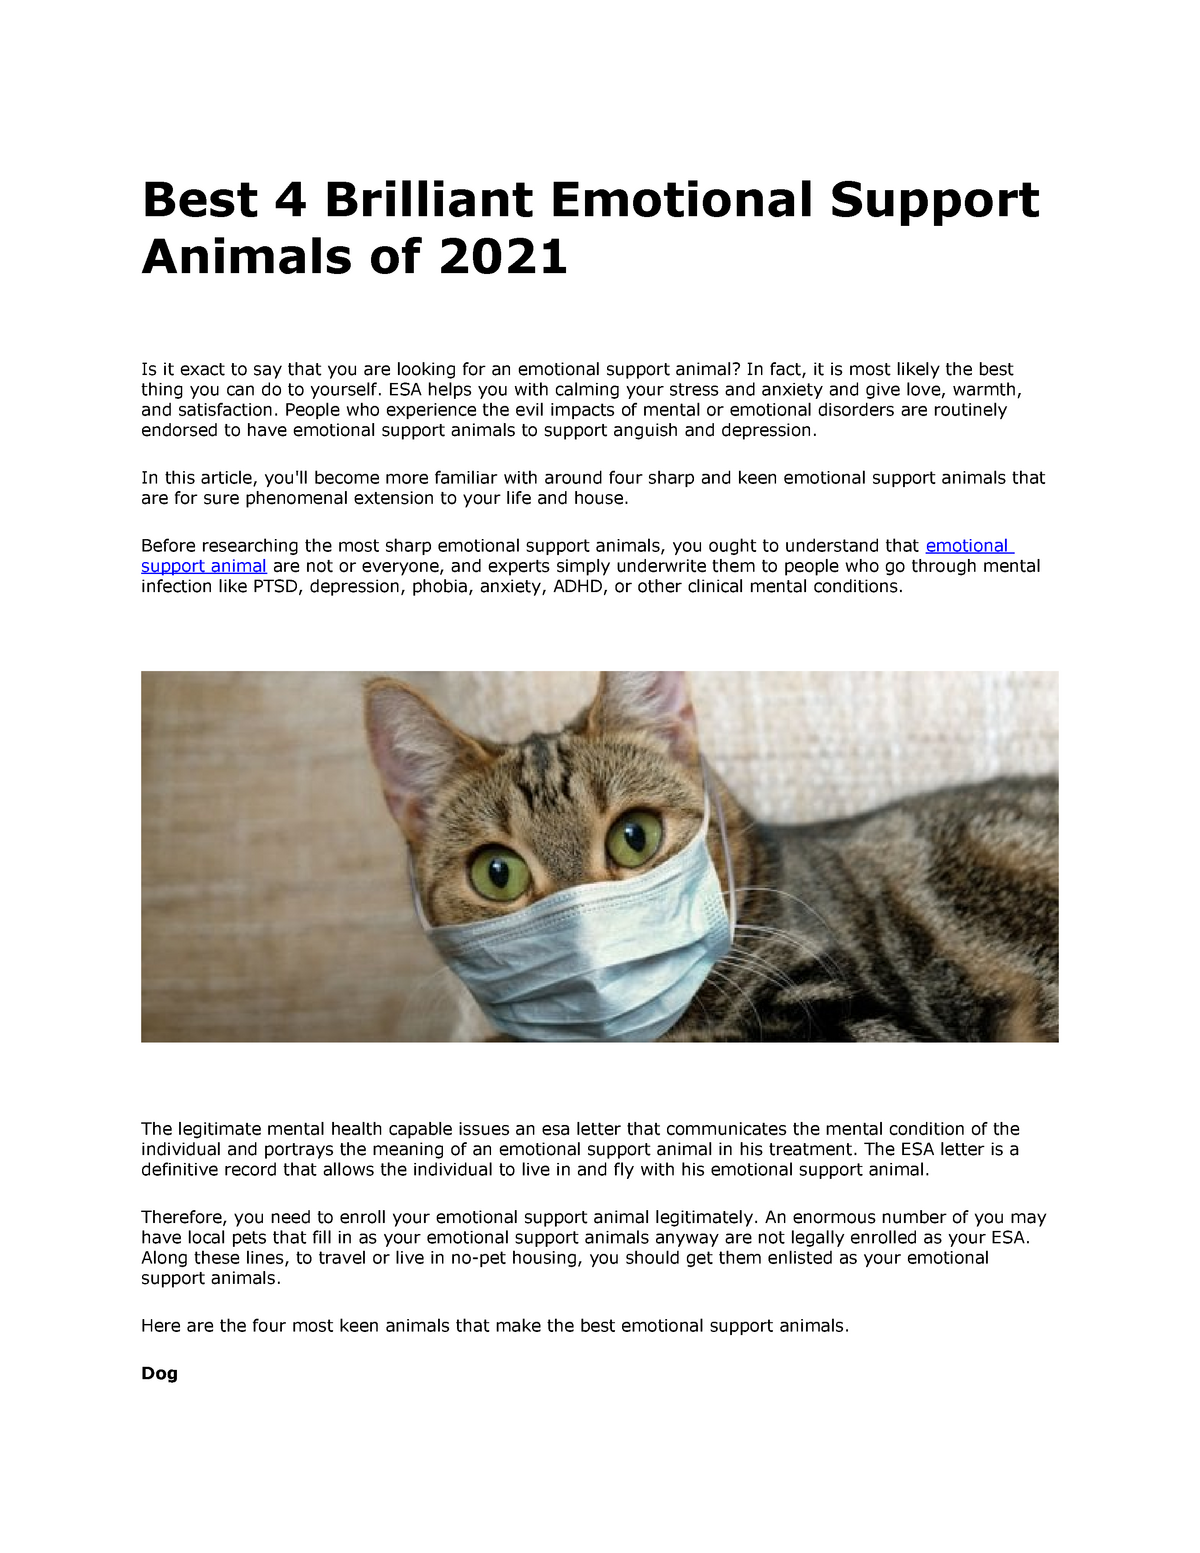 Comb 4 8 august - Blogs - Best 4 Brilliant Emotional Support Animals of  2021 Is it exact to say that - Studocu